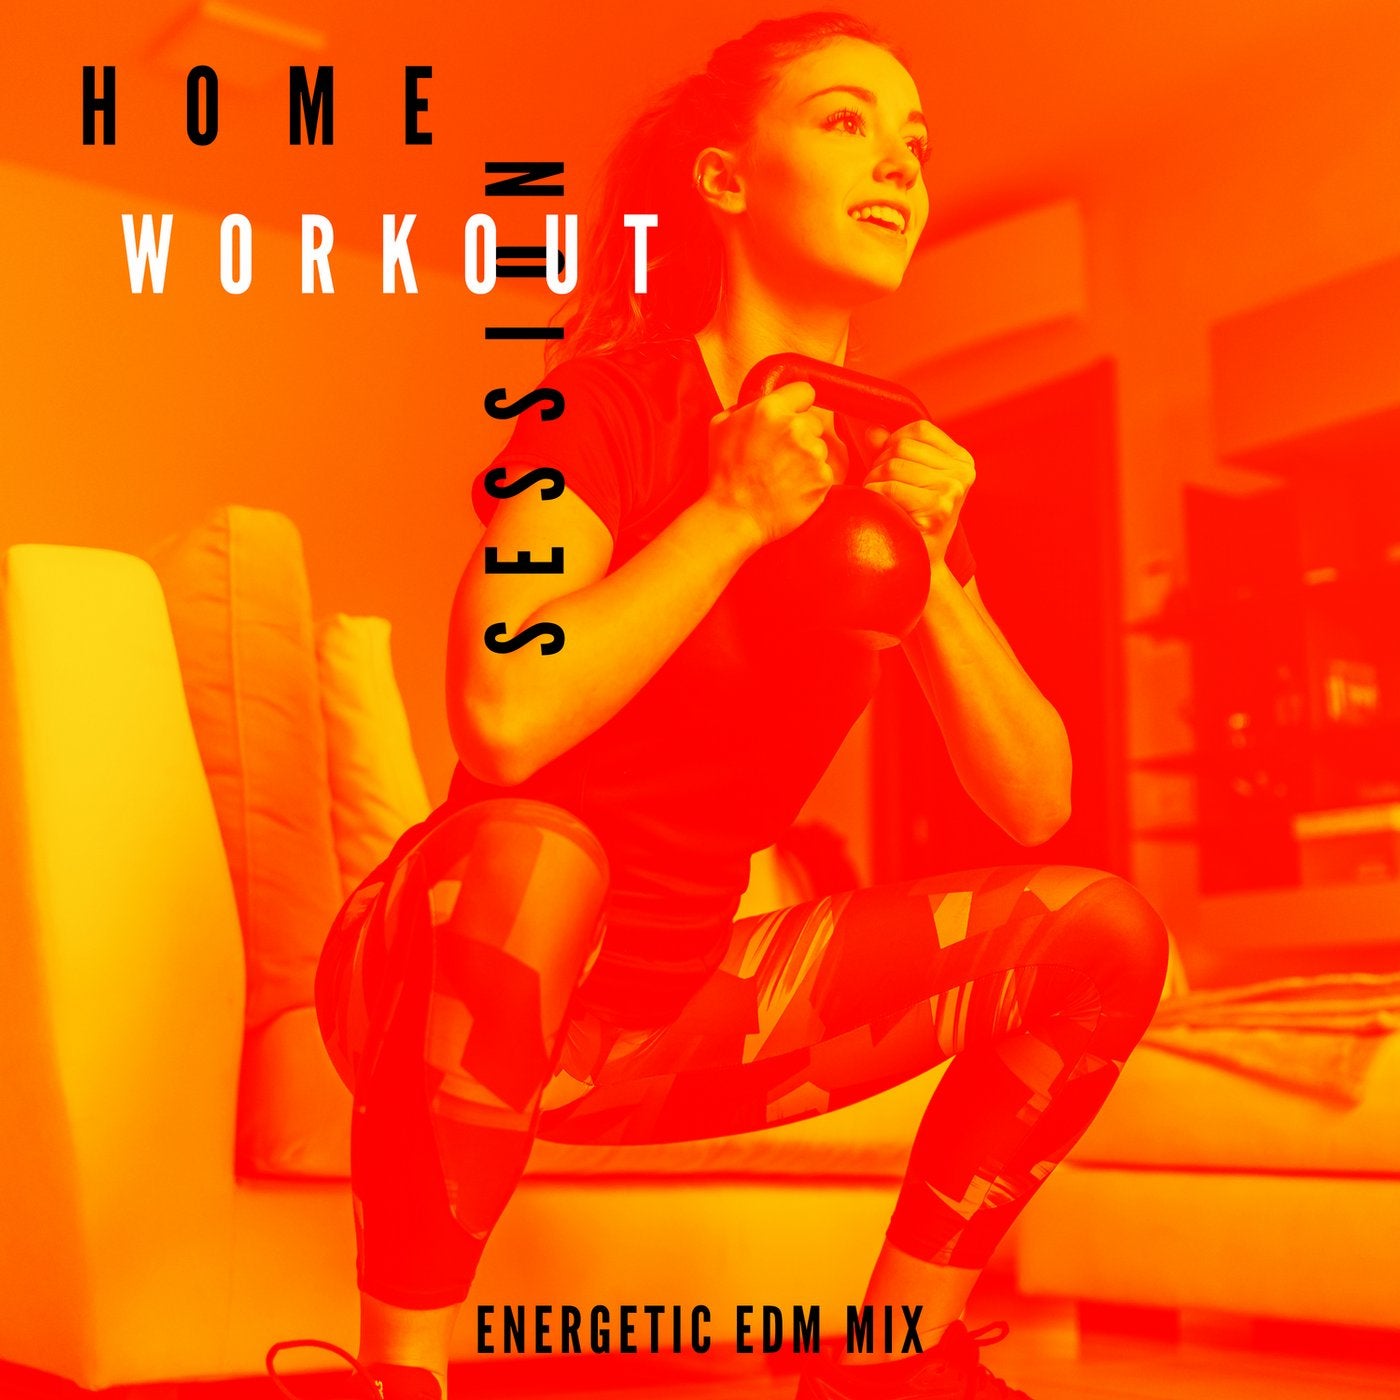 Home Workout Session: Energetic EDM Mix